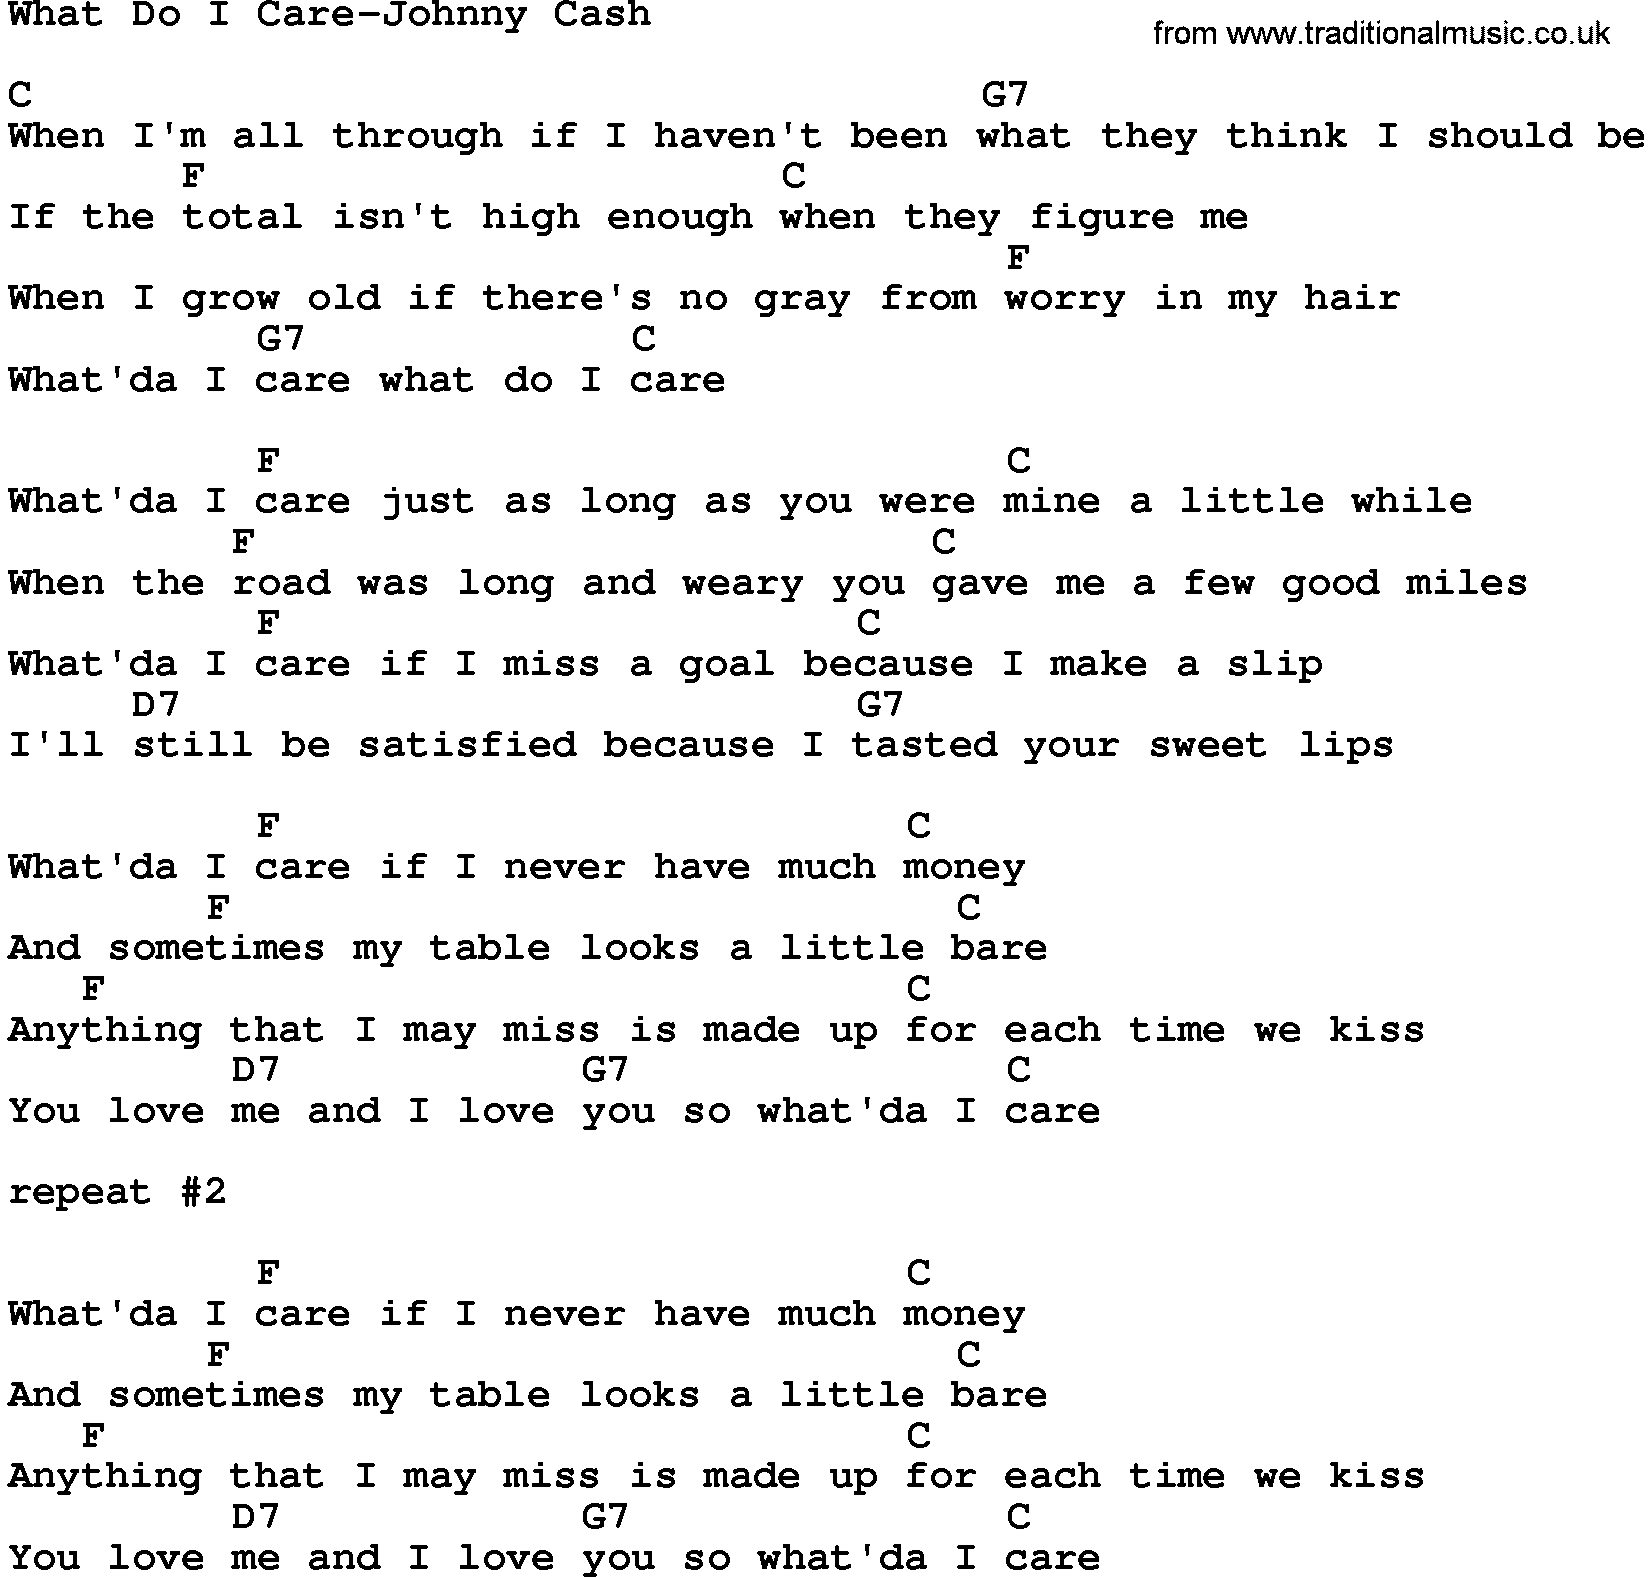 Country music song: What Do I Care-Johnny Cash lyrics and chords